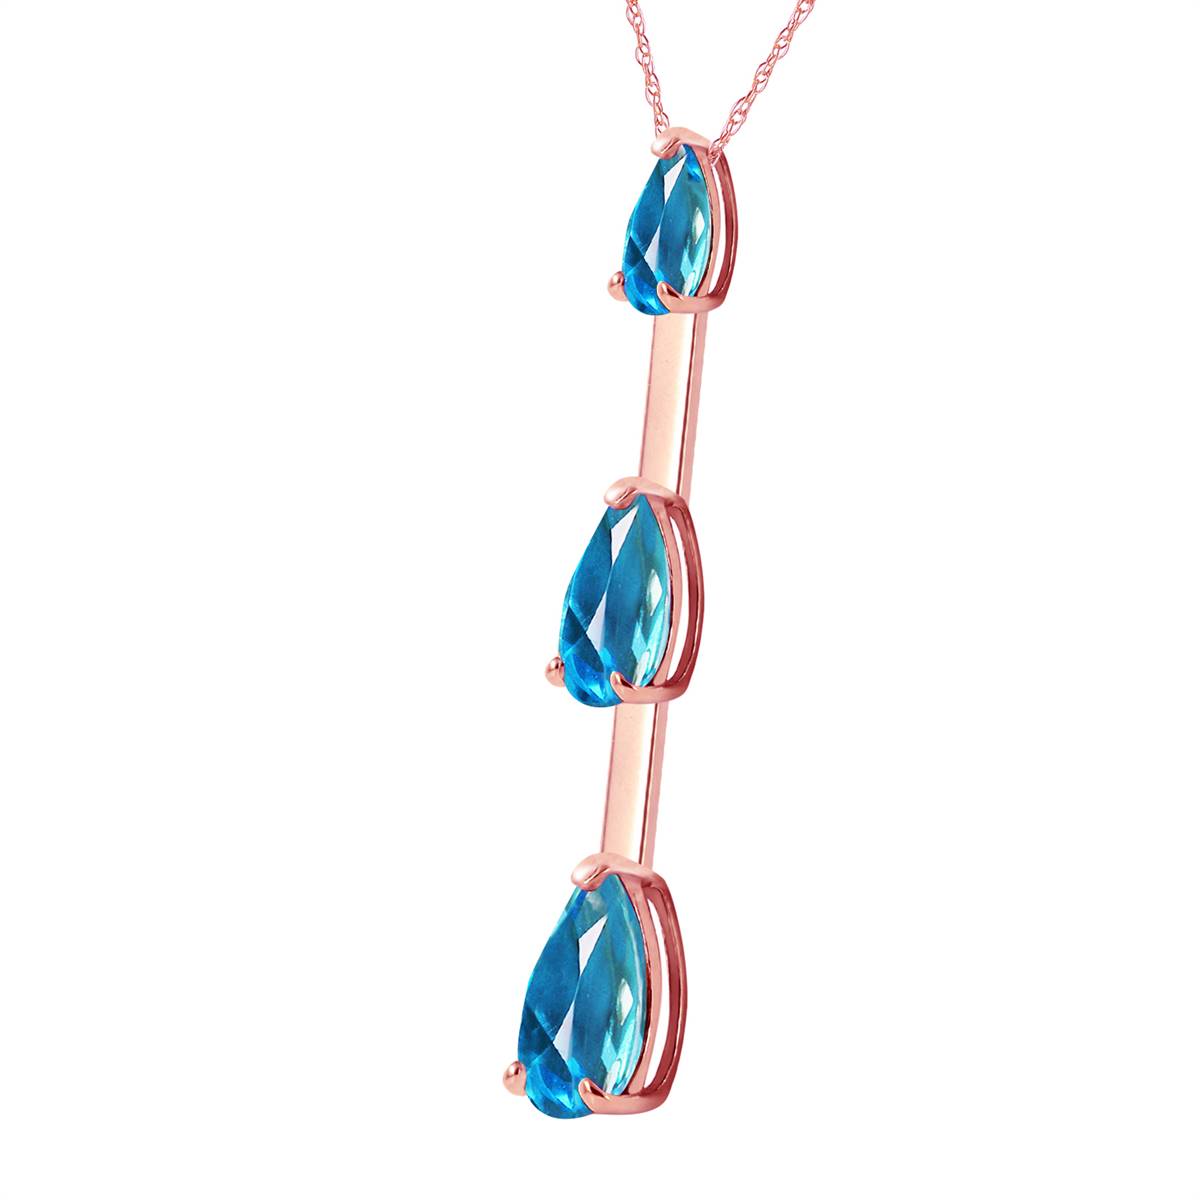 14K Solid Rose Gold Blue Topaz Jewelry Series Necklace